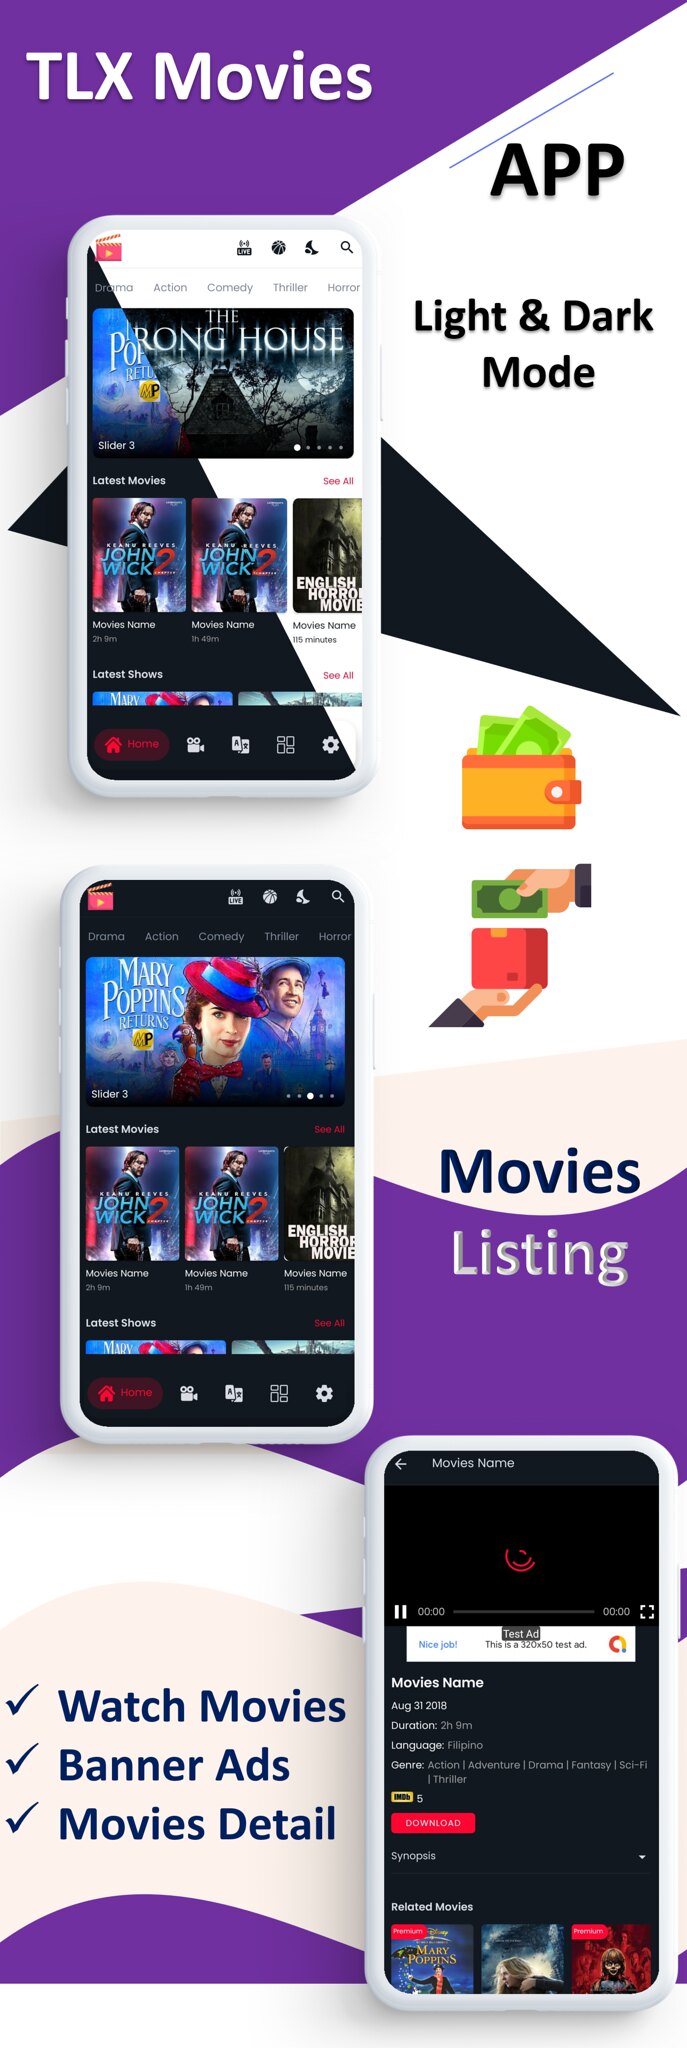 TLX Movies App | Web Series, Movies,  Videos Streaming, Live TV | Payment Gateways | Subscriptions - 3